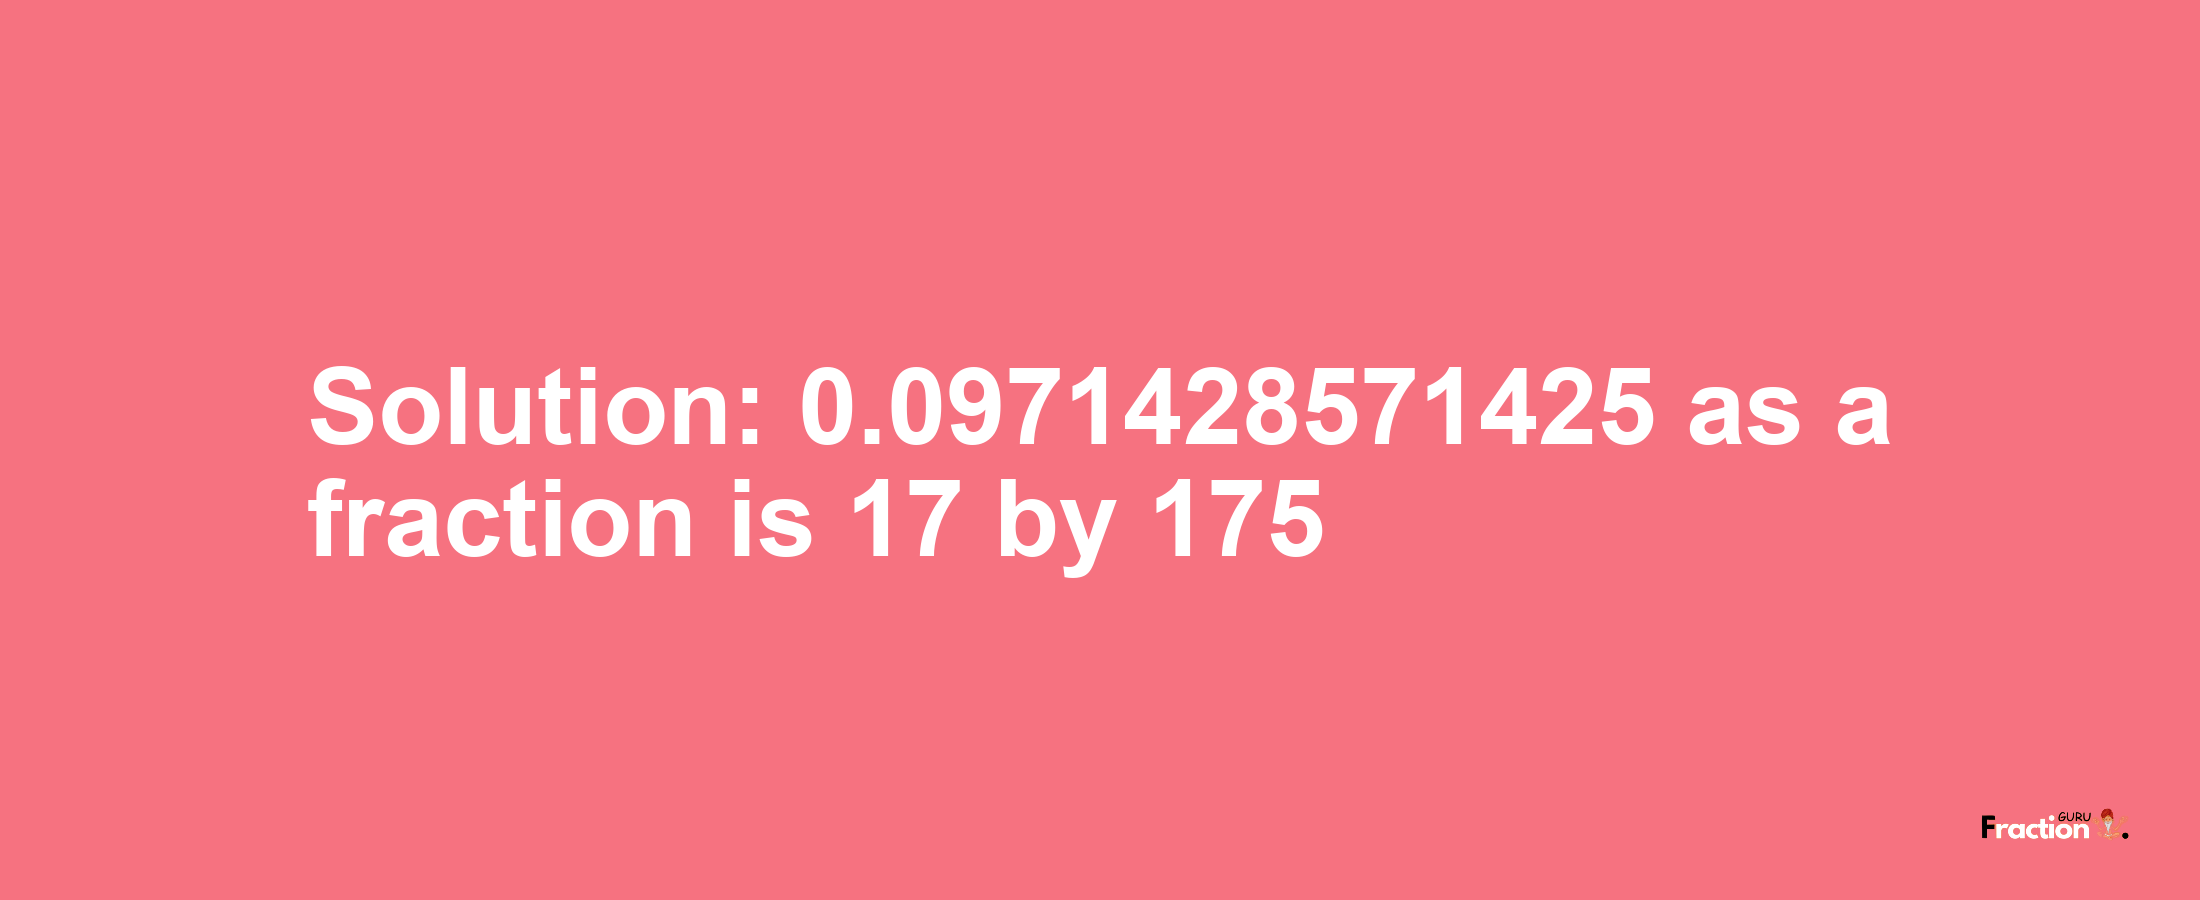 Solution:0.0971428571425 as a fraction is 17/175